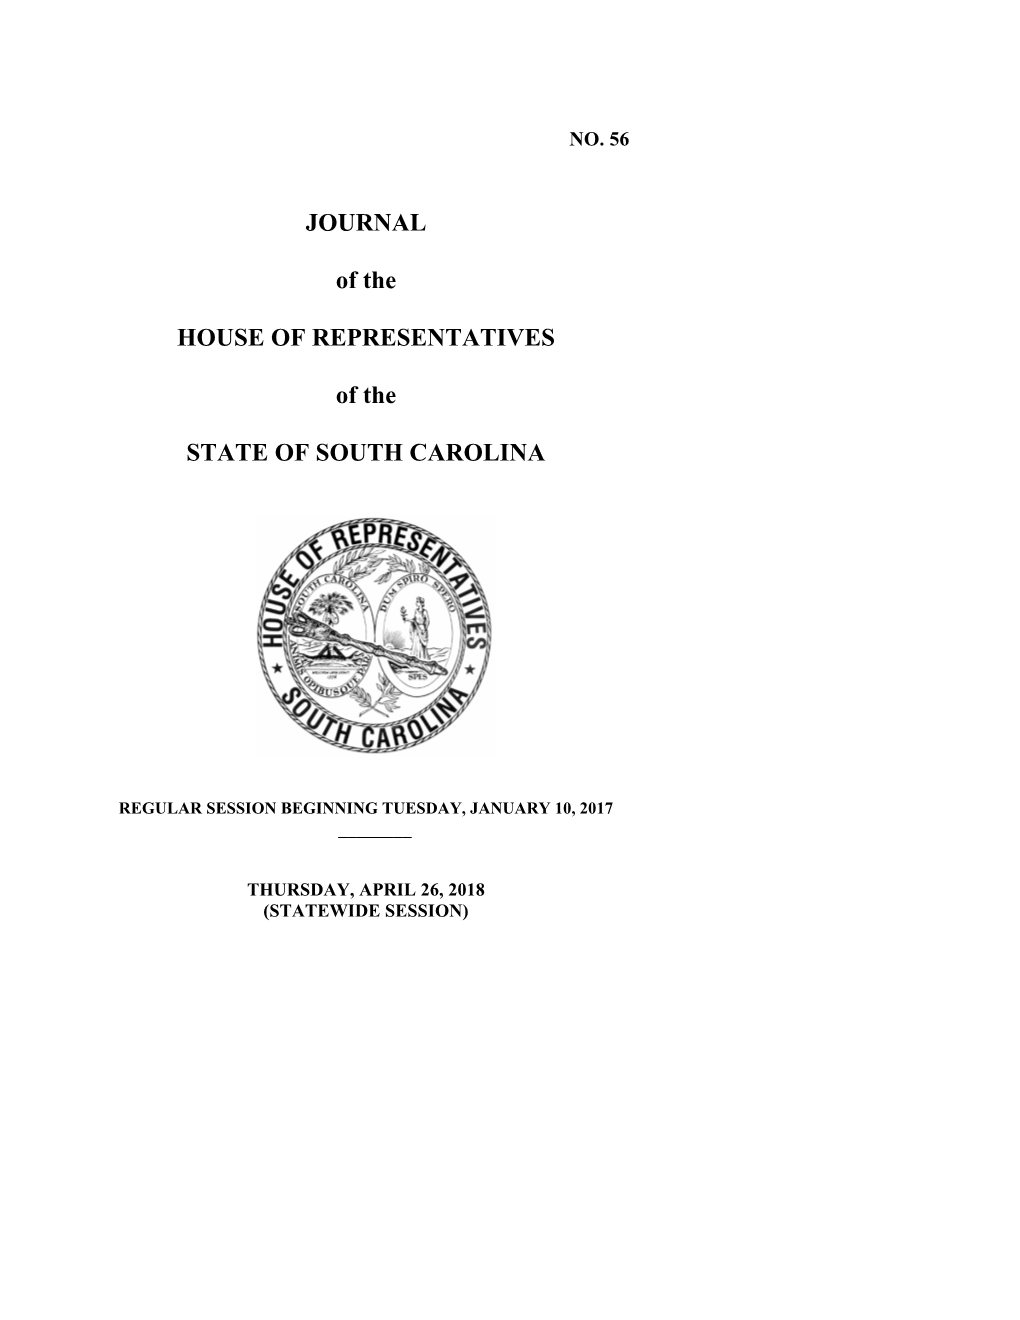 JOURNAL of the HOUSE of REPRESENTATIVES of the STATE OF